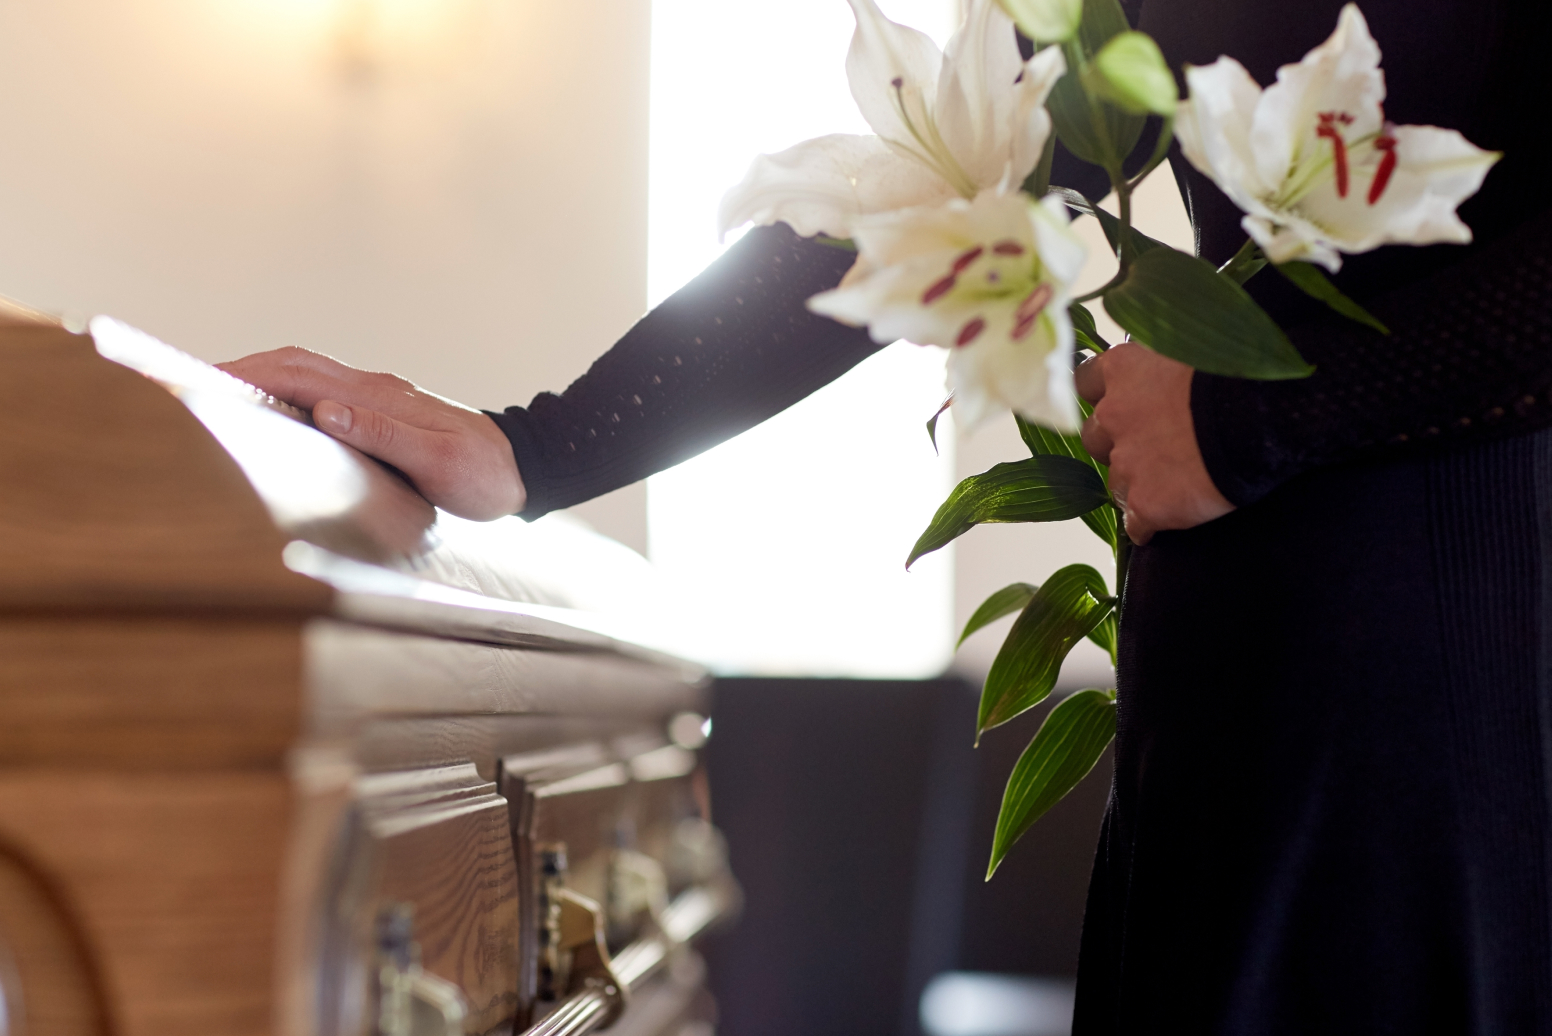 A person in mourning places flowers on top of a coffin. The medical examiner or funeral director will ensure all known and necessary information is included on the death certificate before signing. 